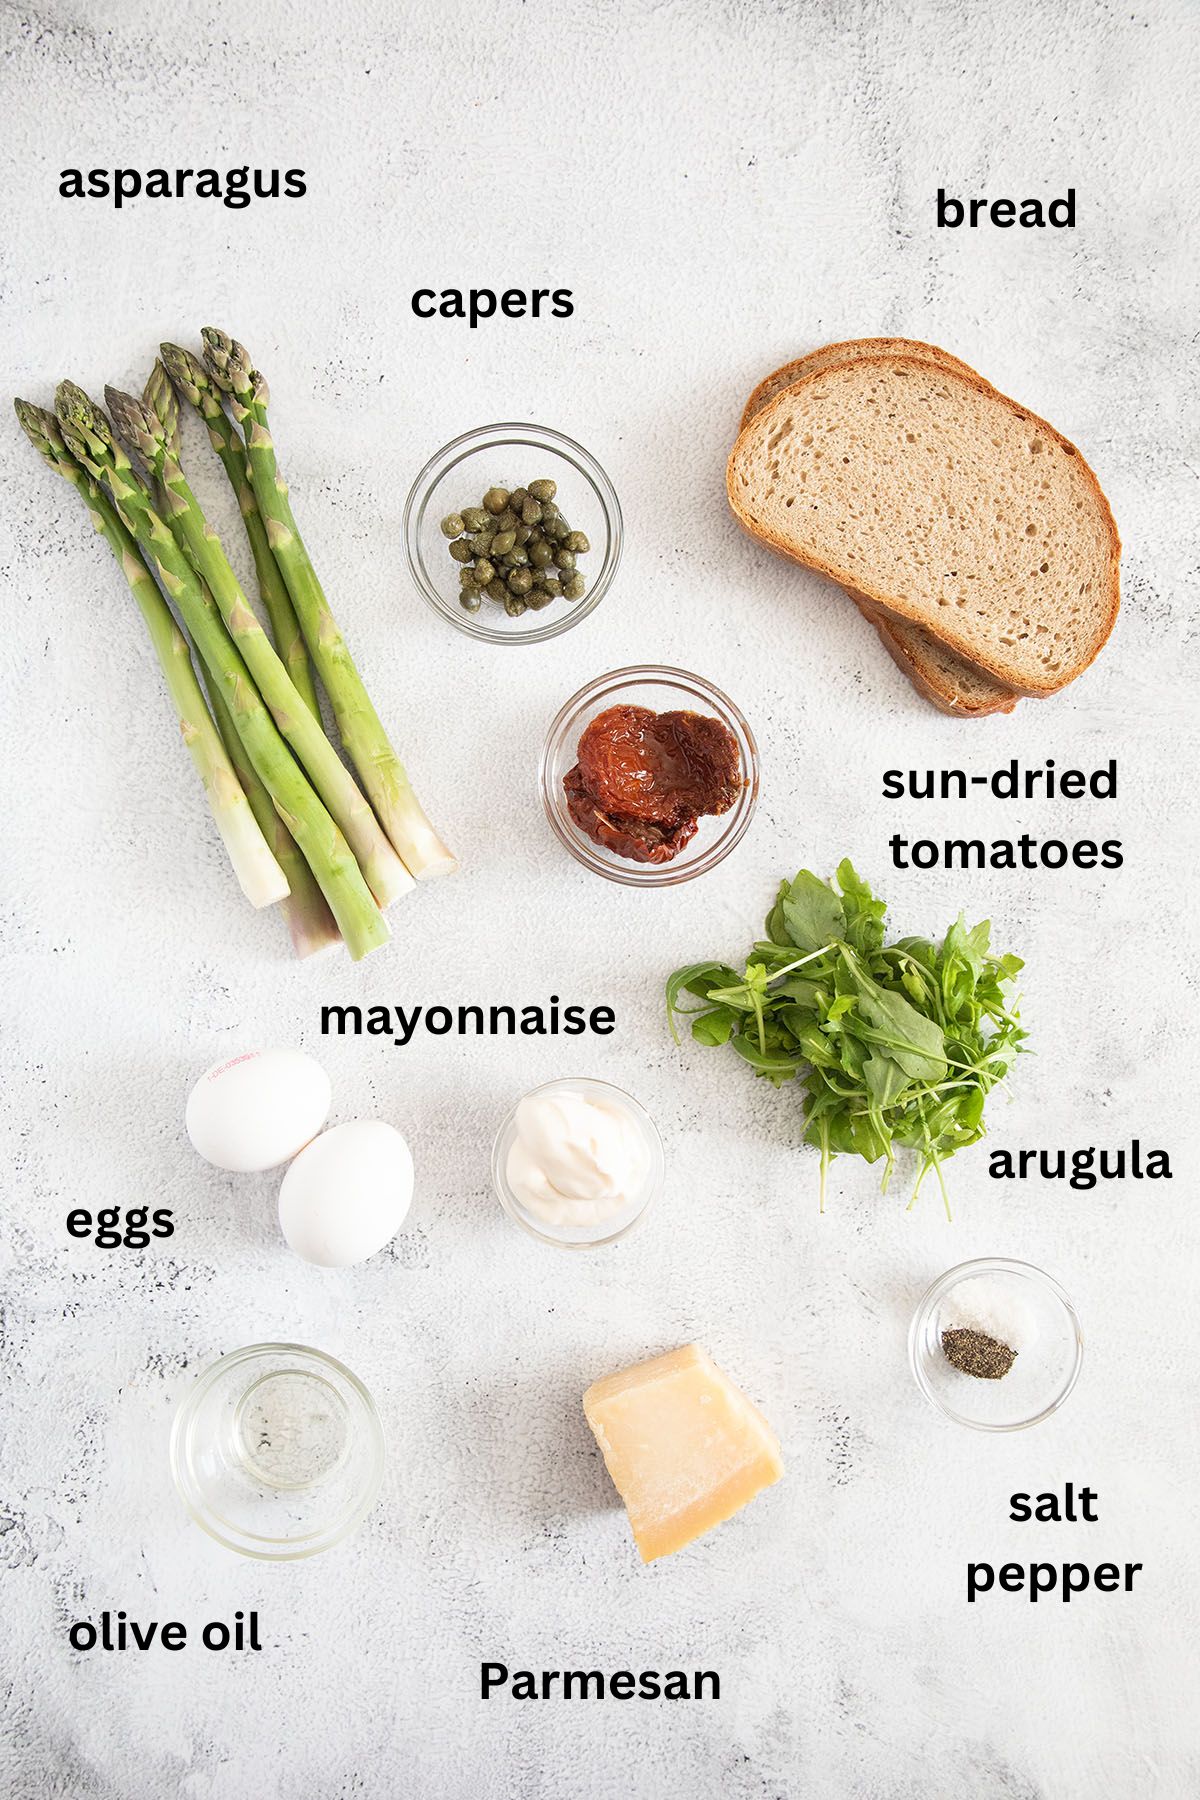 listed ingredients for making toast with asparagus, eggs and parmesan.